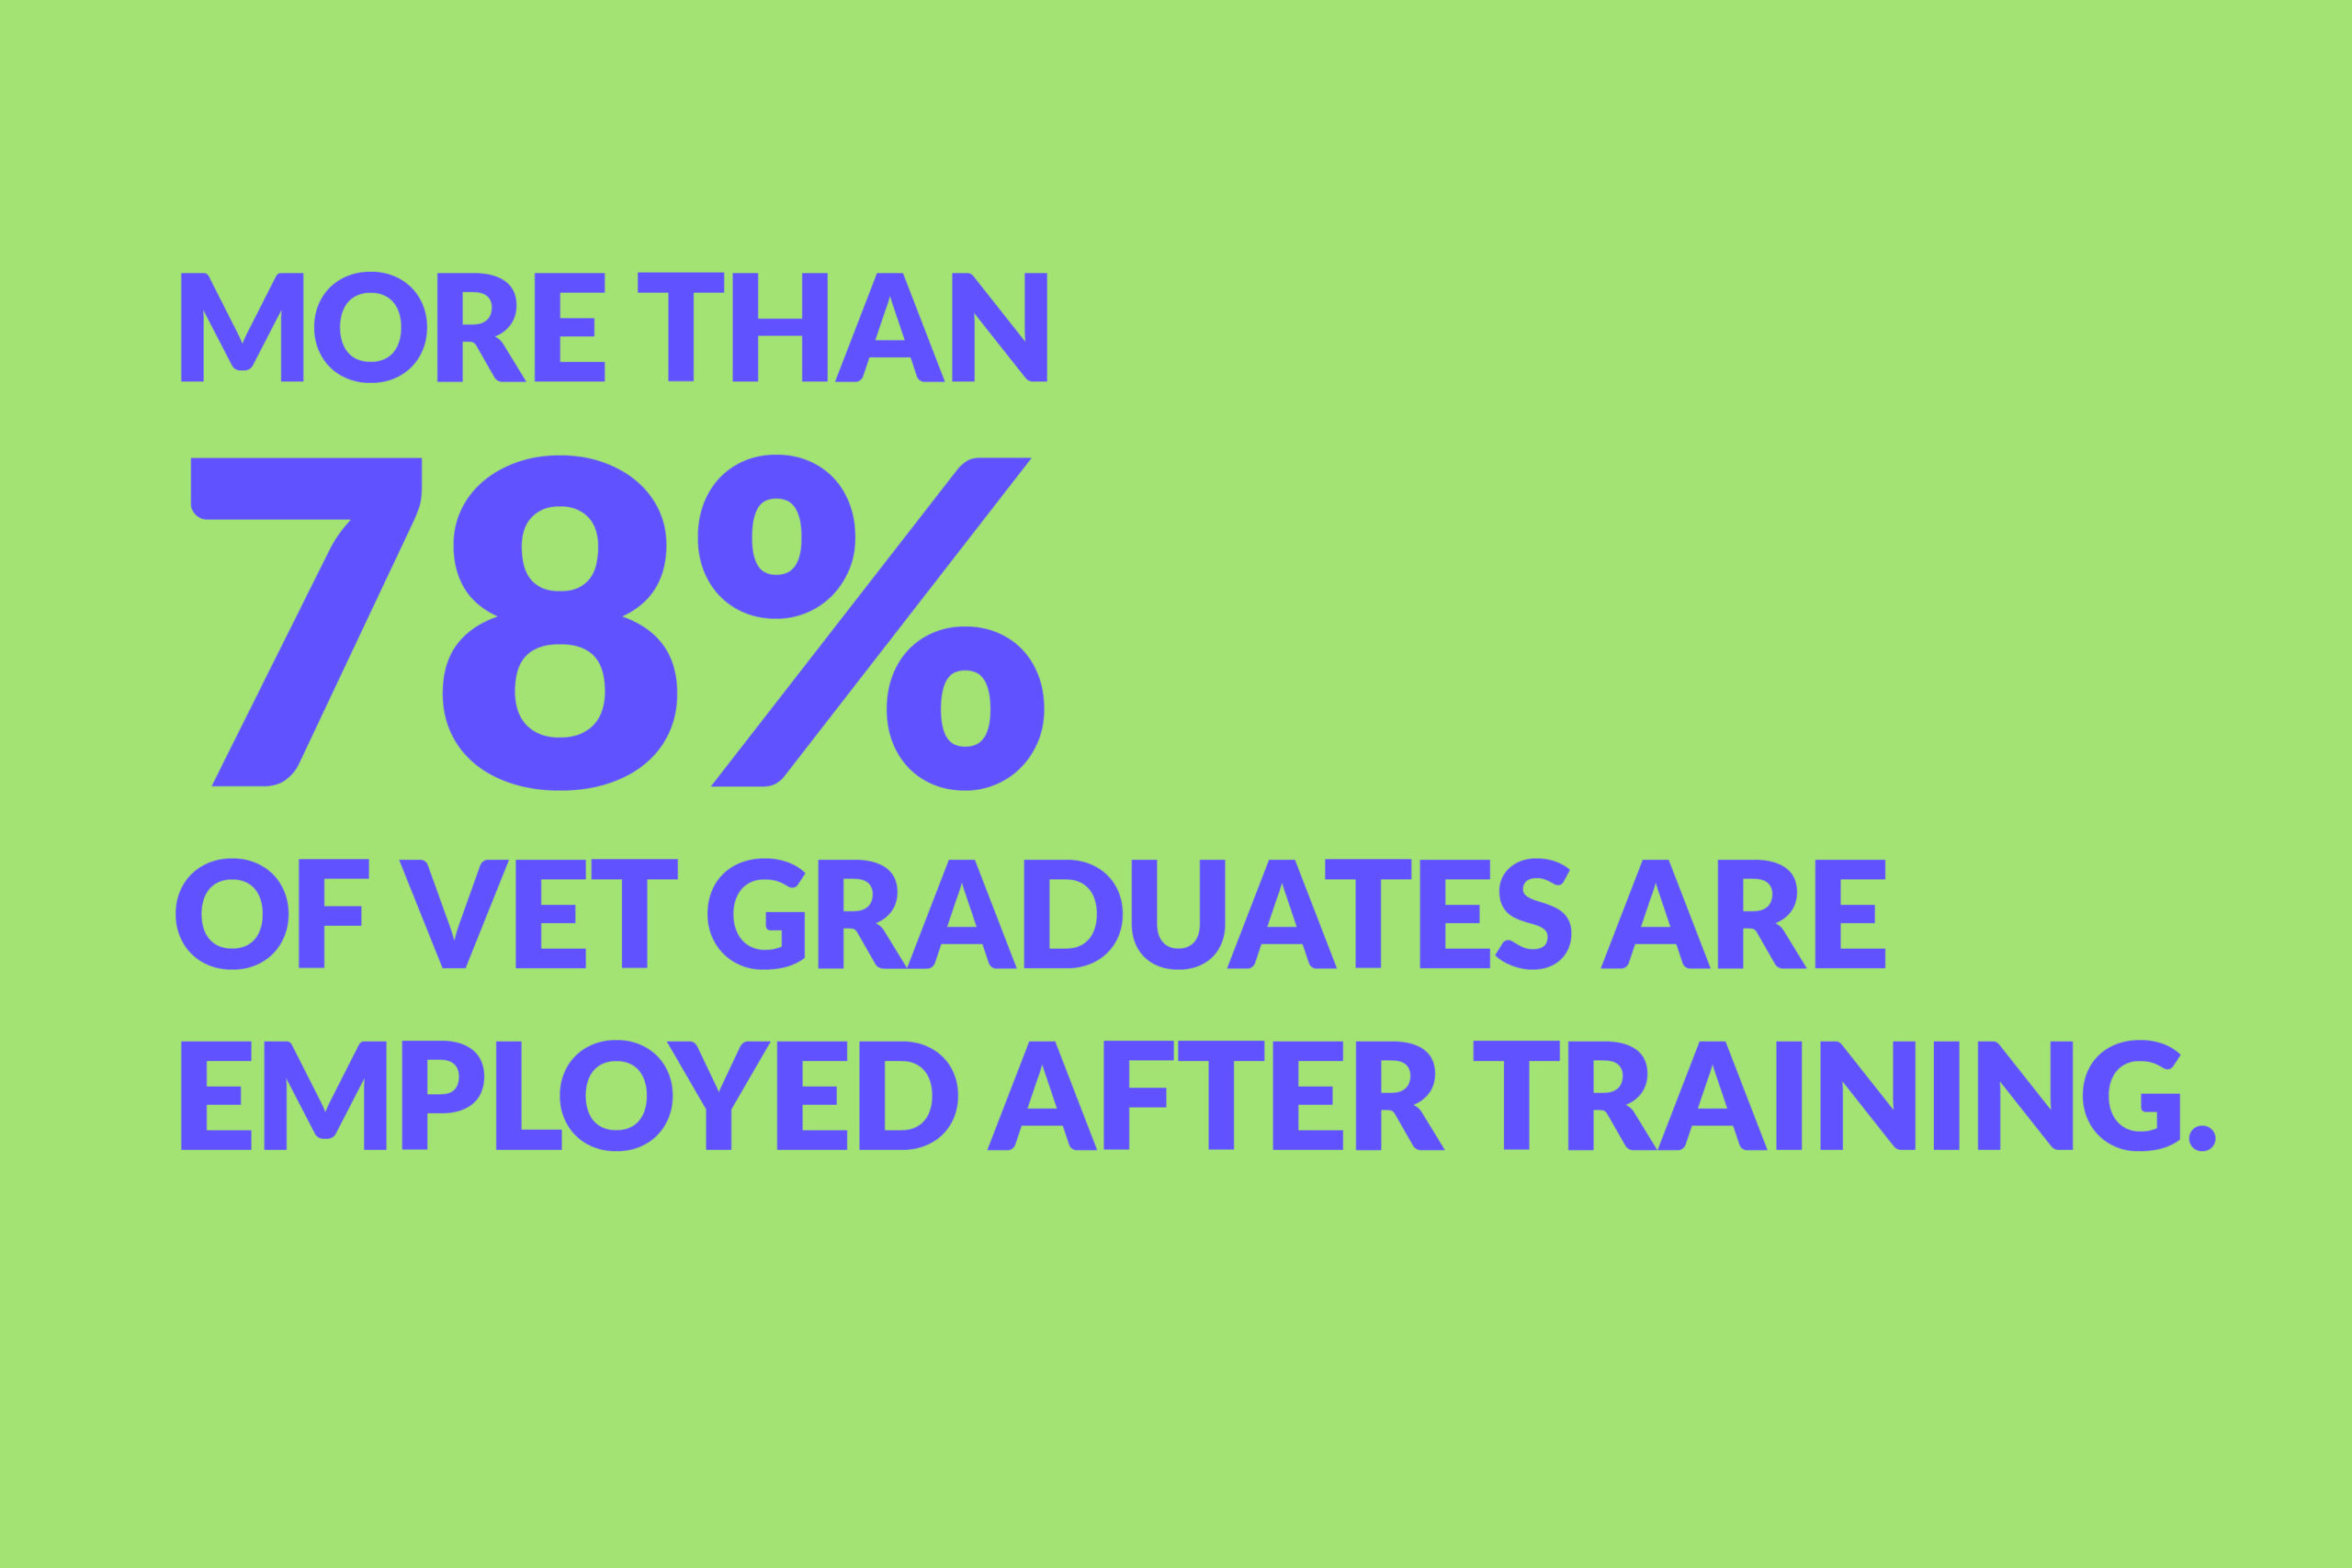 Green background with blue copy saying, 'More than 78% of VET graduates are employed after training.'